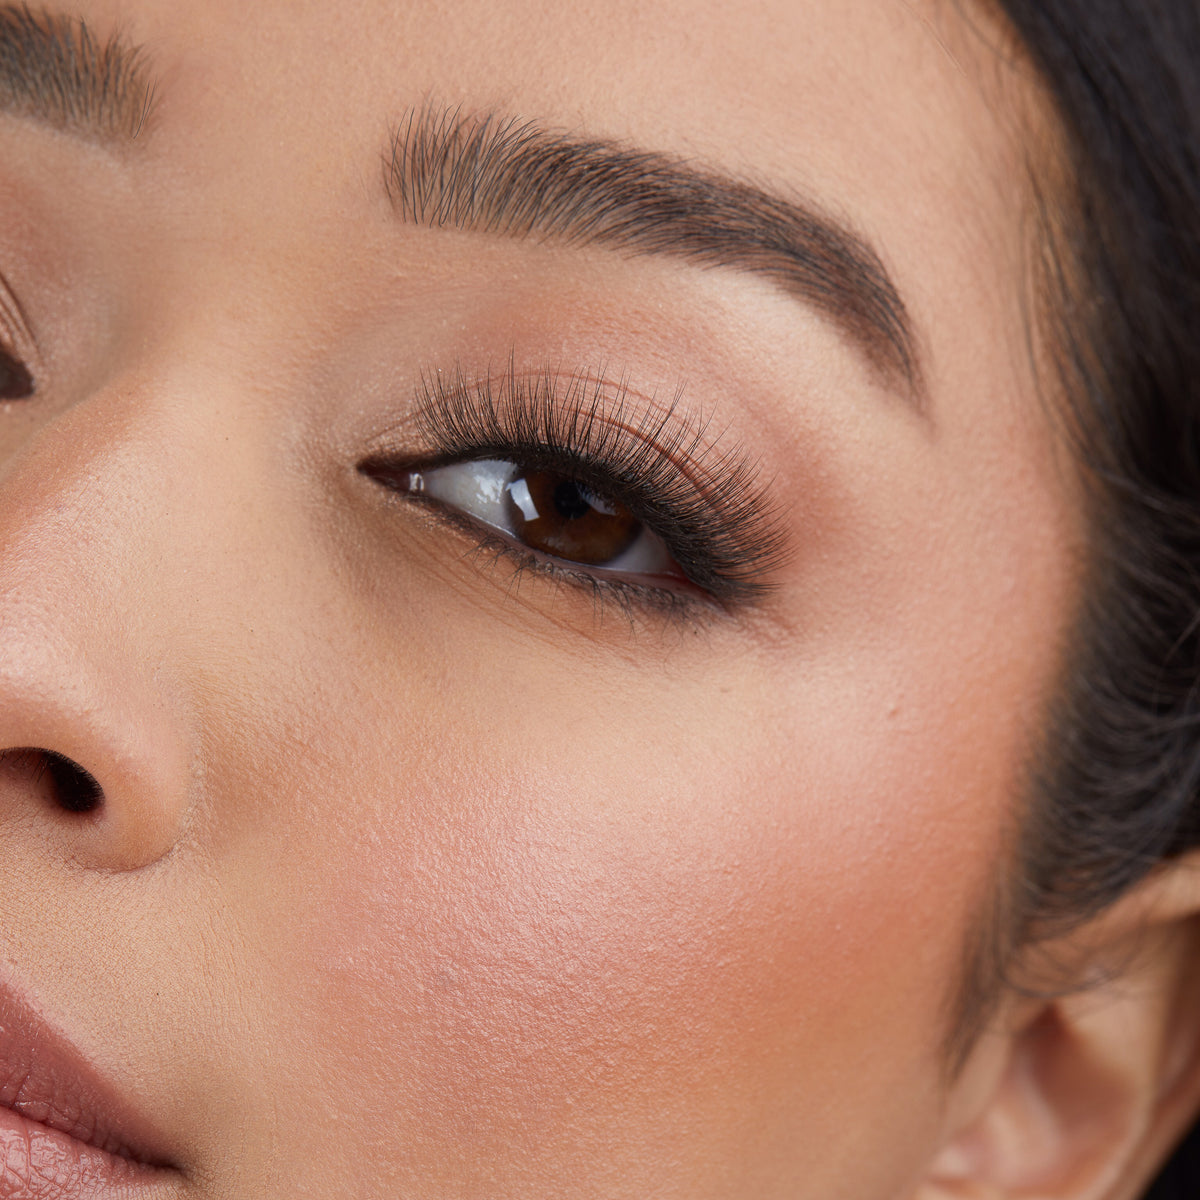 Lithe Lashes Core Collection lash style named 04 Long and Graceful, an image of a model’s face wearing lithe lashes on both eyes, with full makeup, looking from a left side profile, semi zoomed in, displaying the elegance of the lashes on her eyes.